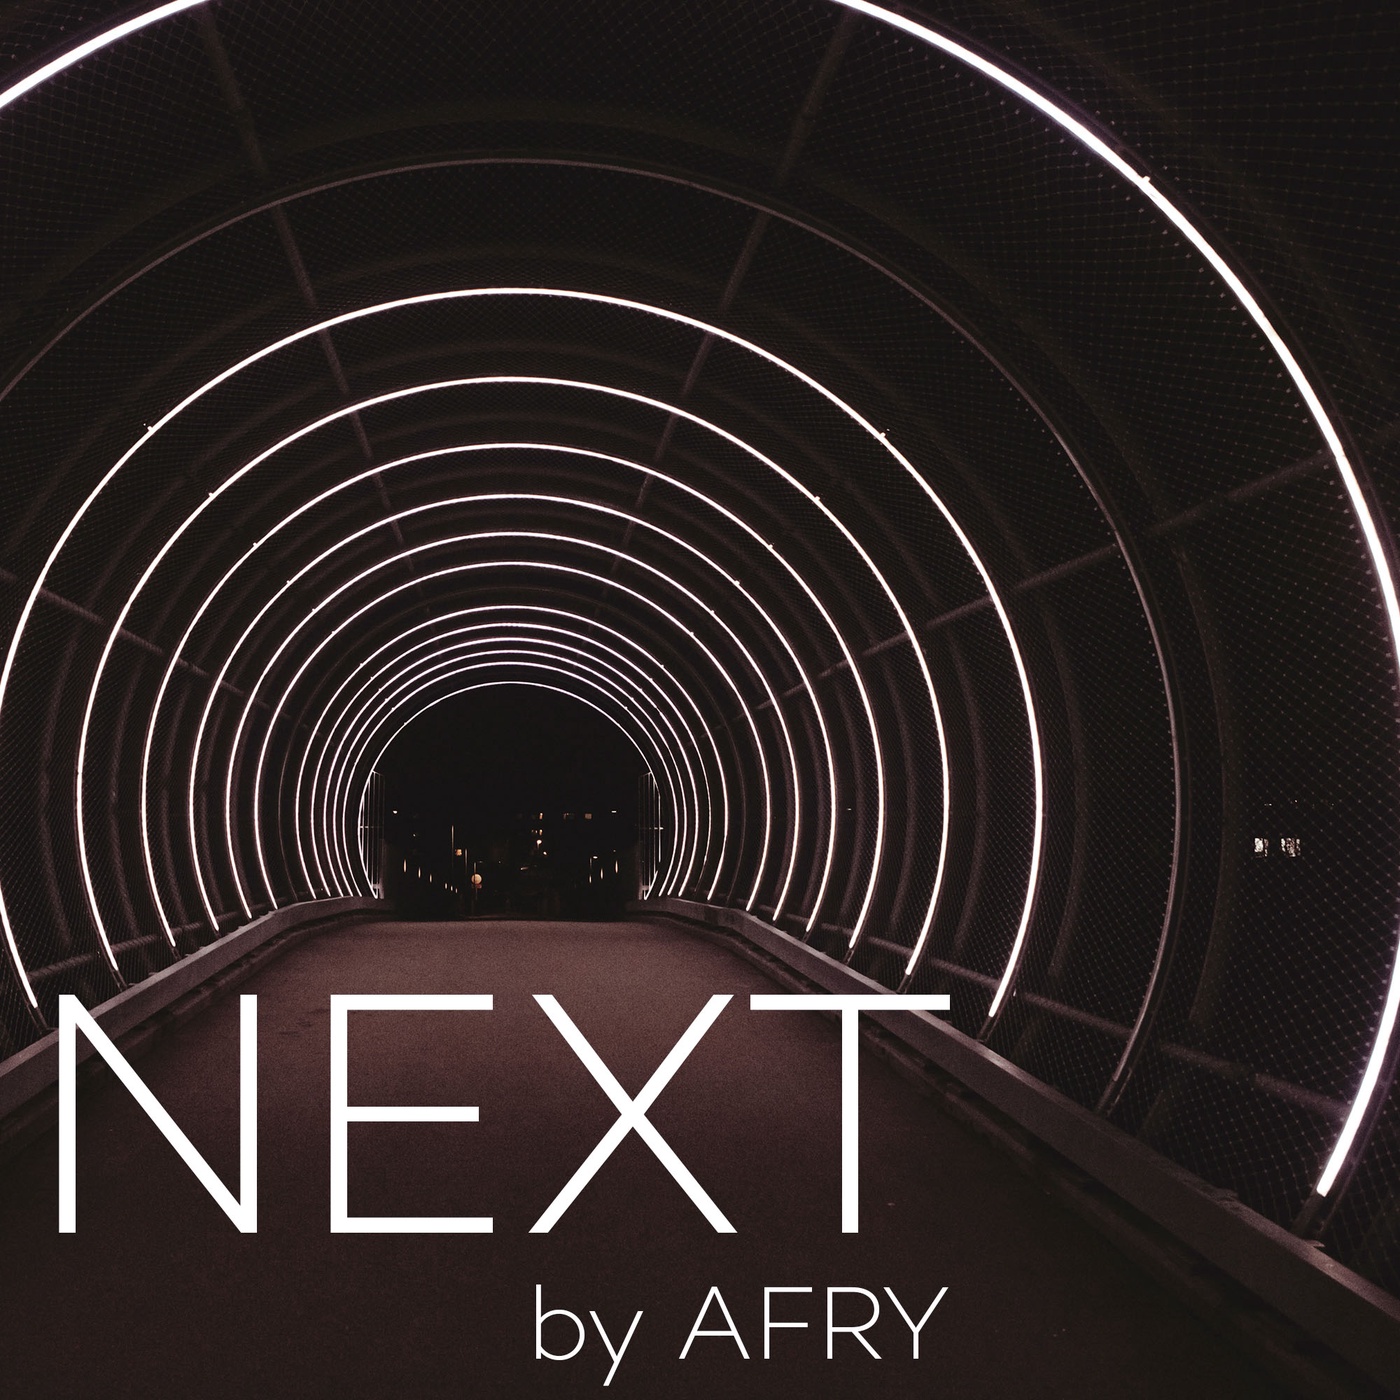 NEXT (by AFRY)